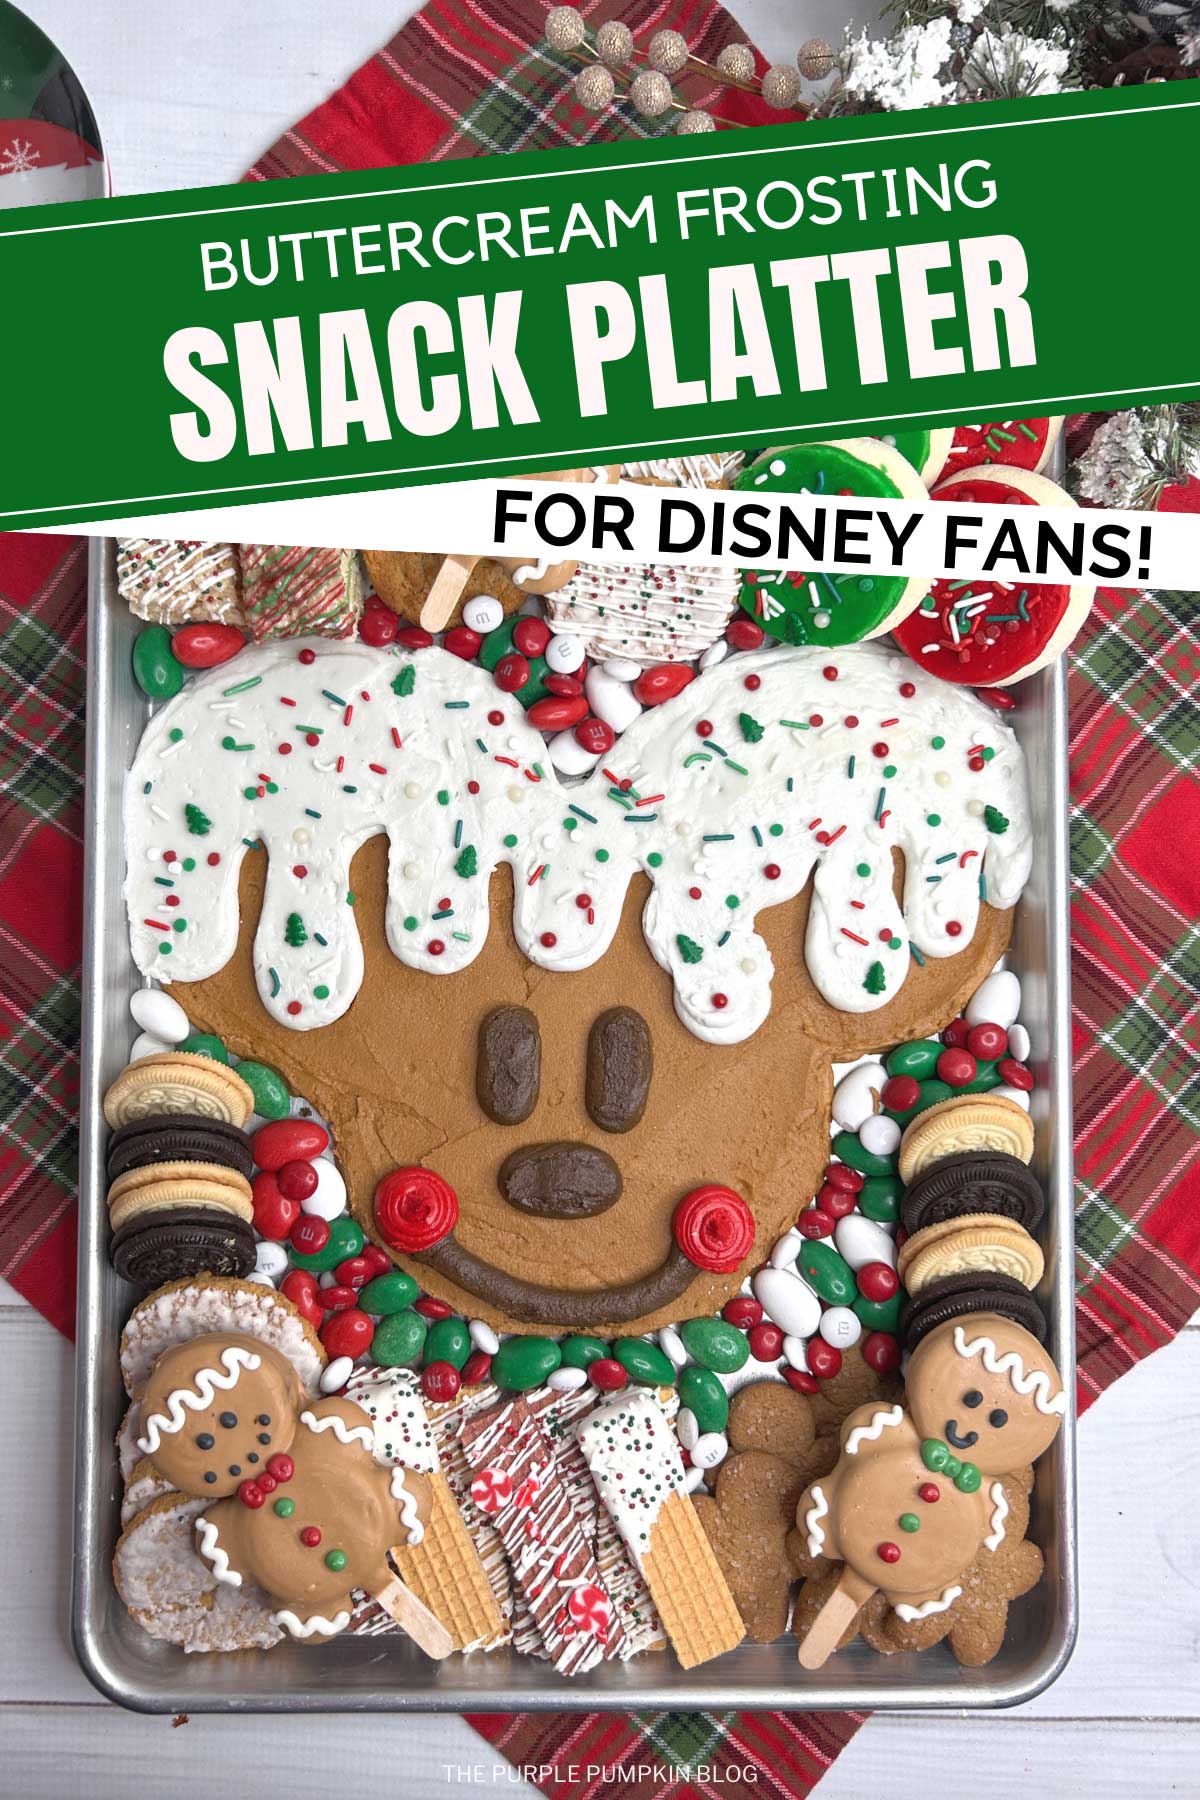 A metal tray with Mickey Mouse's head piped on with brown frosting, with white icing dripping down to resemble a gingerbread man. Surrounded by red, white, and green candies, a selection of cookies and other festive treats. The tray is surrounded by festive decorations and tableware.